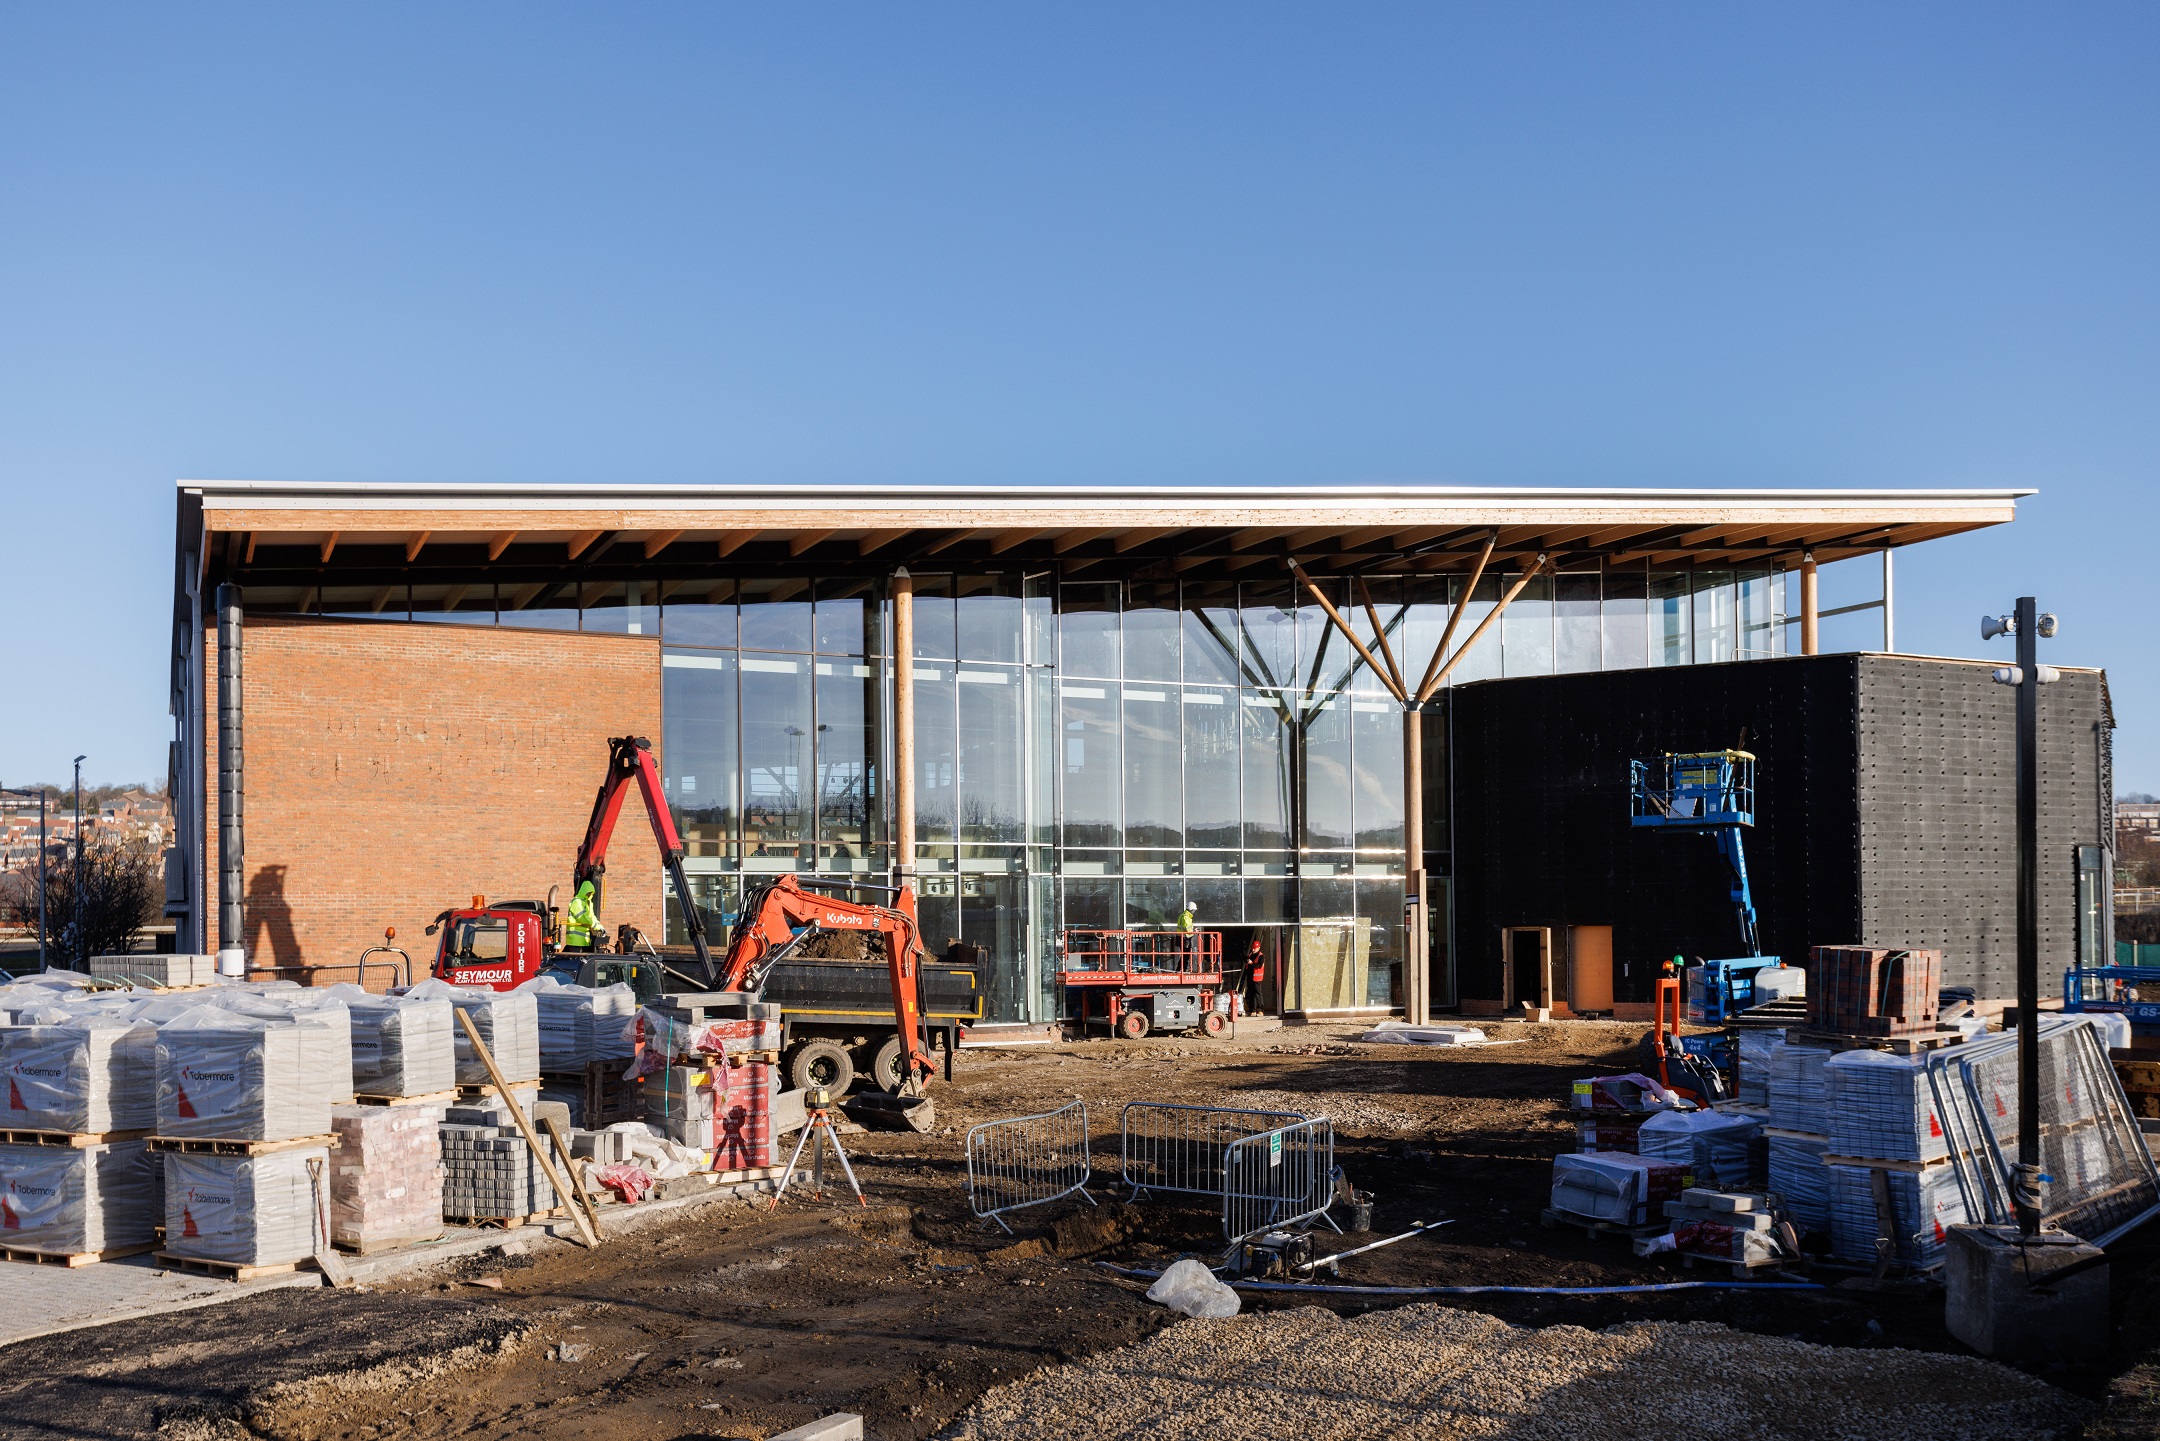 Barker and Stonehouse's new flagship store is taking shape in Gateshead